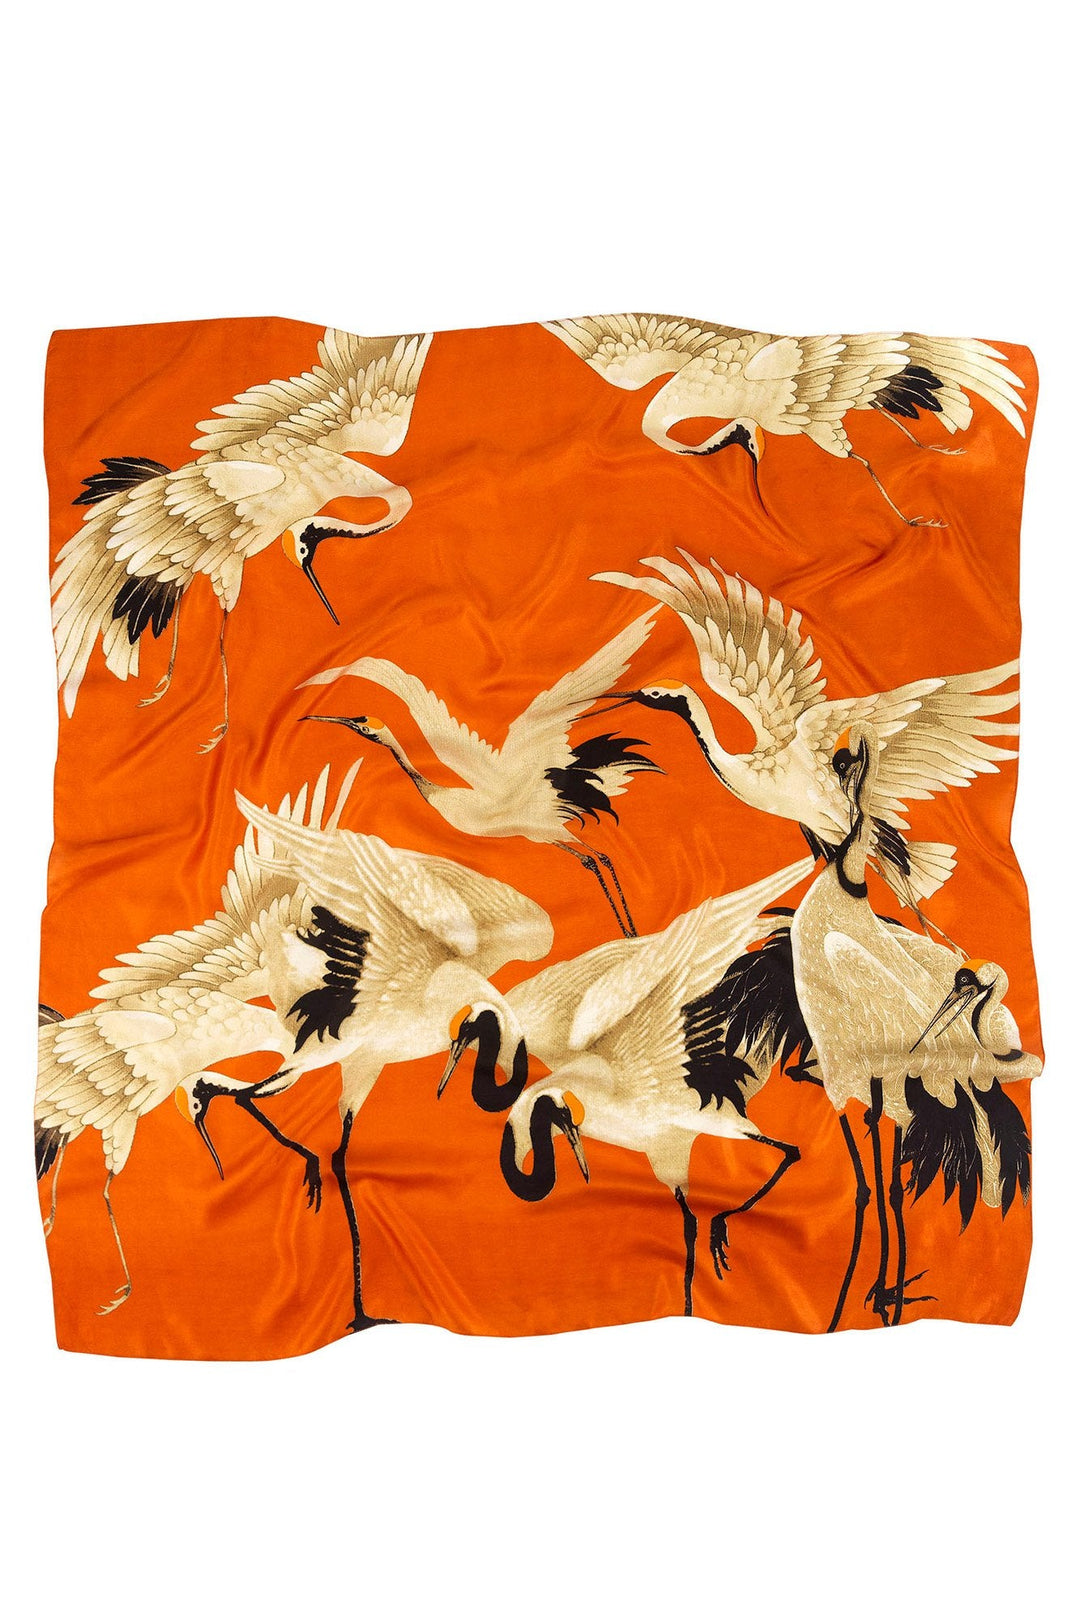 One Hundred Stars Stork Orange Silk Square Scarf- 100% silk, 100% hand screen printed and a whole 100cm x 100cm of print, this silk scarf oozes luxury whether you wear it knotted around your neck, as a headscarf or fastened around the handle of your favourite handbag. 